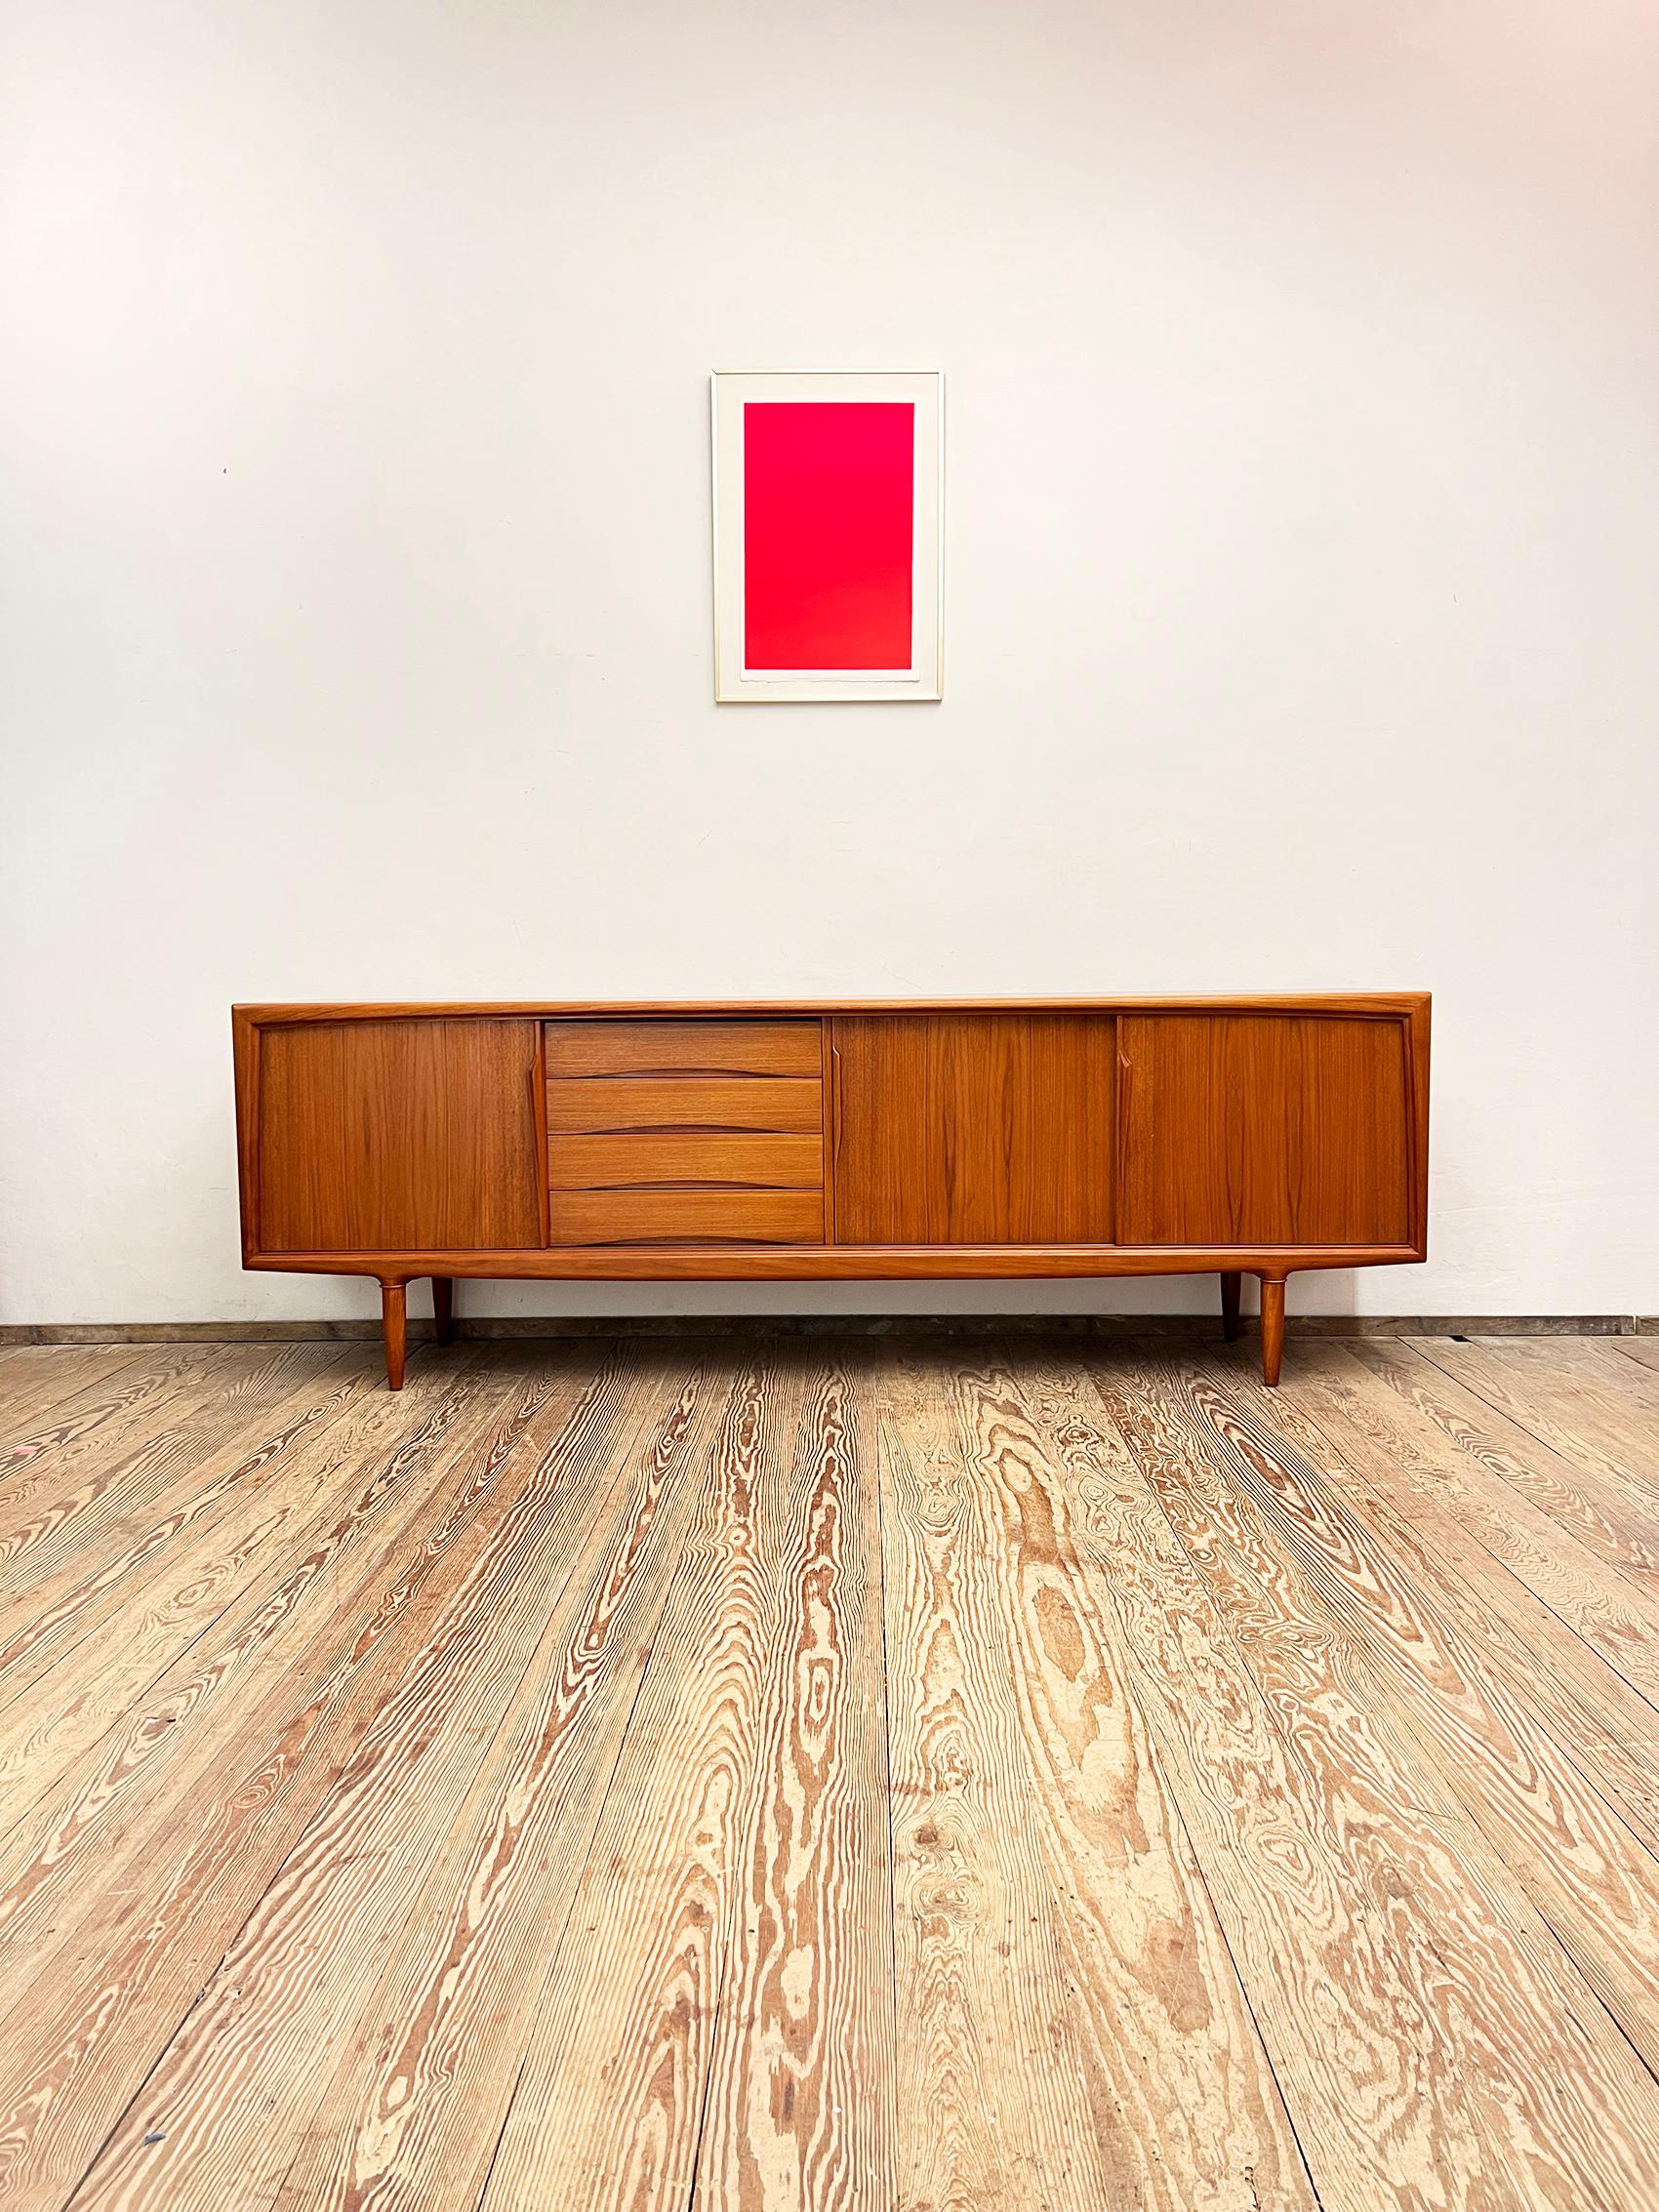 Dimensions: 240x47x80 cm (Width x Depth x Height)

This Scandinavian mid century modern teak credenza was manufactured in the 1950s by Axel Christensen Odder or ACO in Denmark.

It shows exquisite Danish craftsmanship and offers plenty of storage